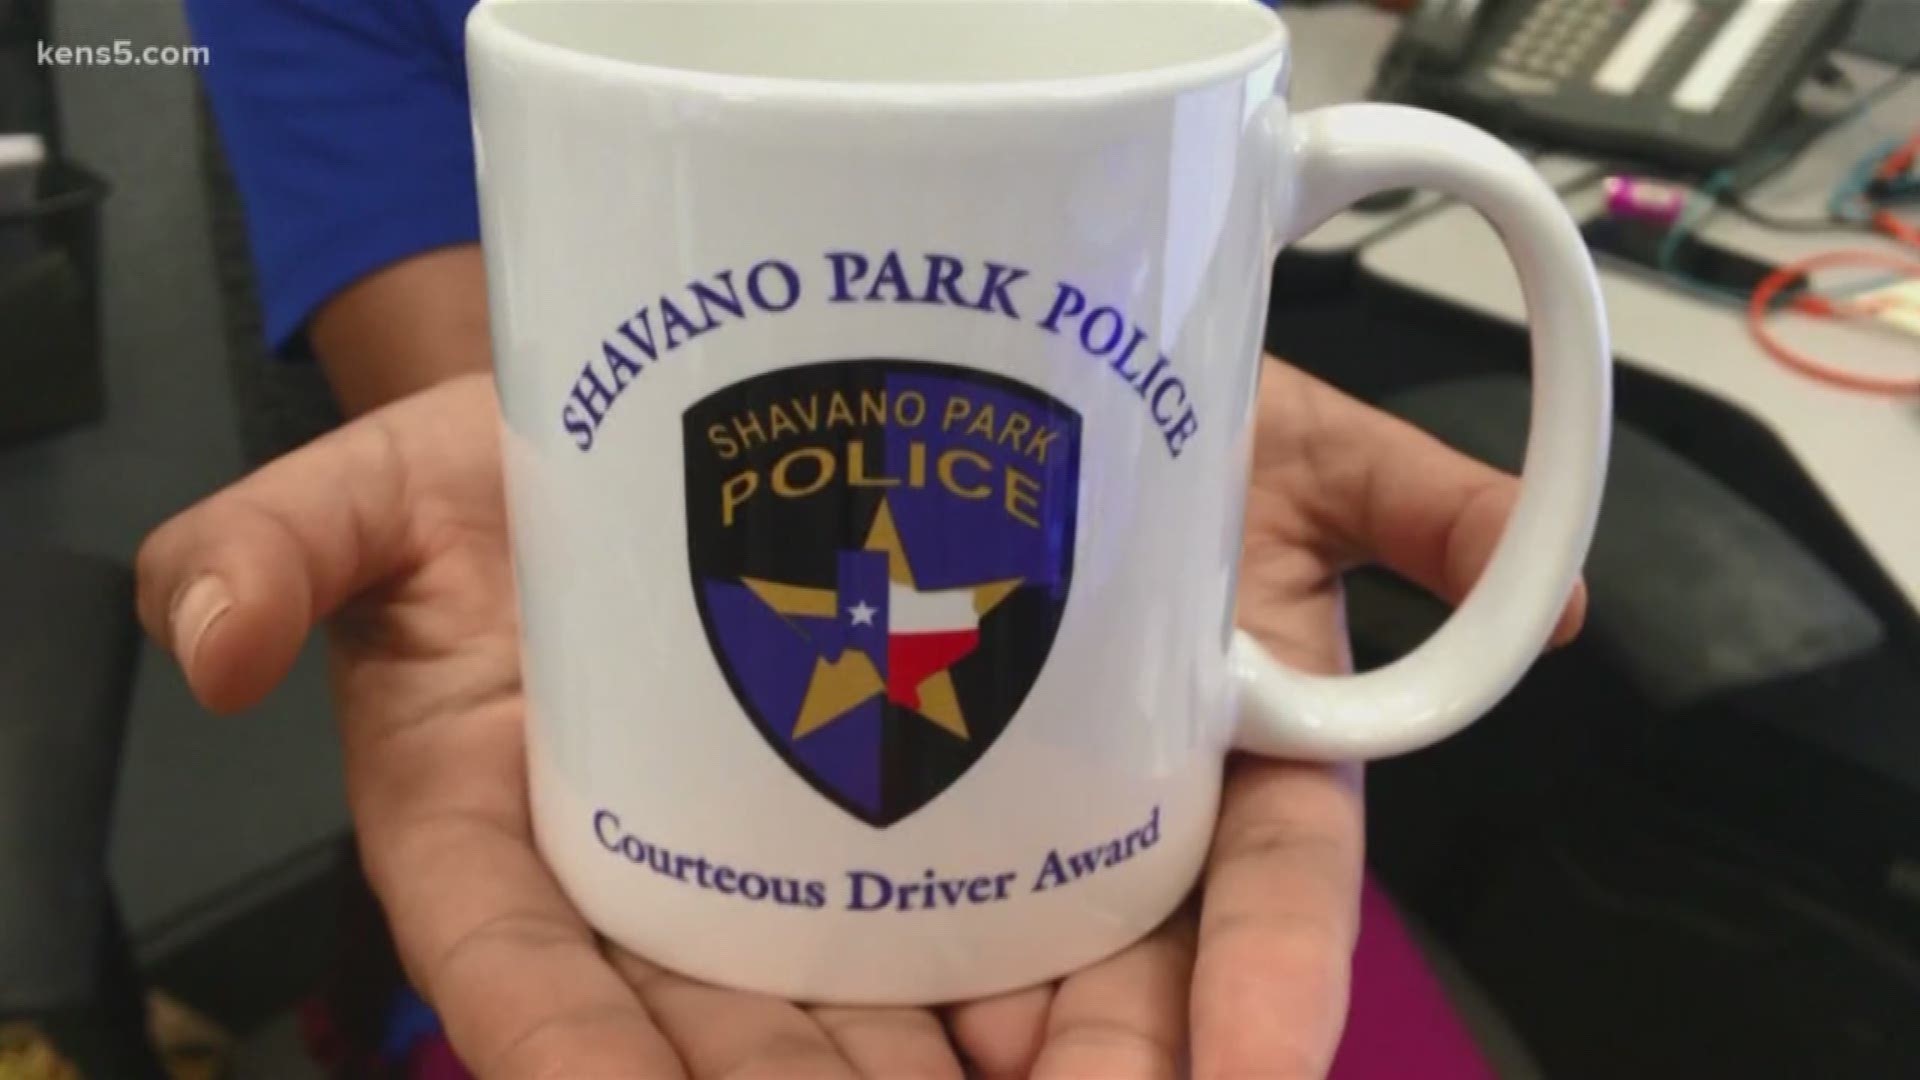 Normally, when you get pulled over by police you did something wrong. But if you get stopped in Shavano Park, you could be doing everything right!